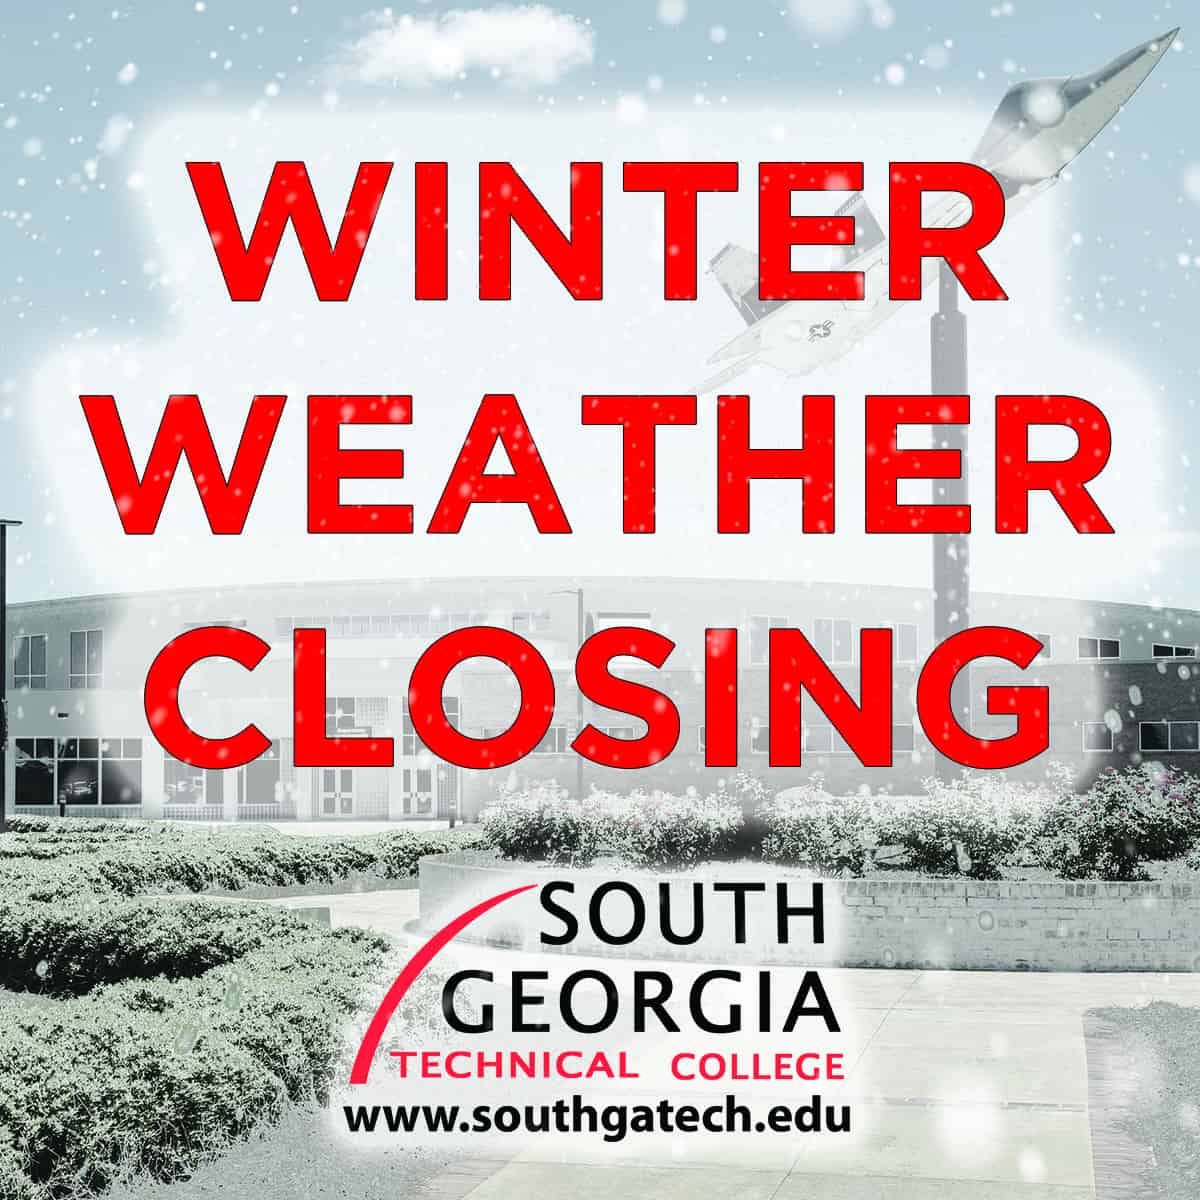 South Georgia Tech to close Wednesday, January 17th, 2018 for weather concerns.